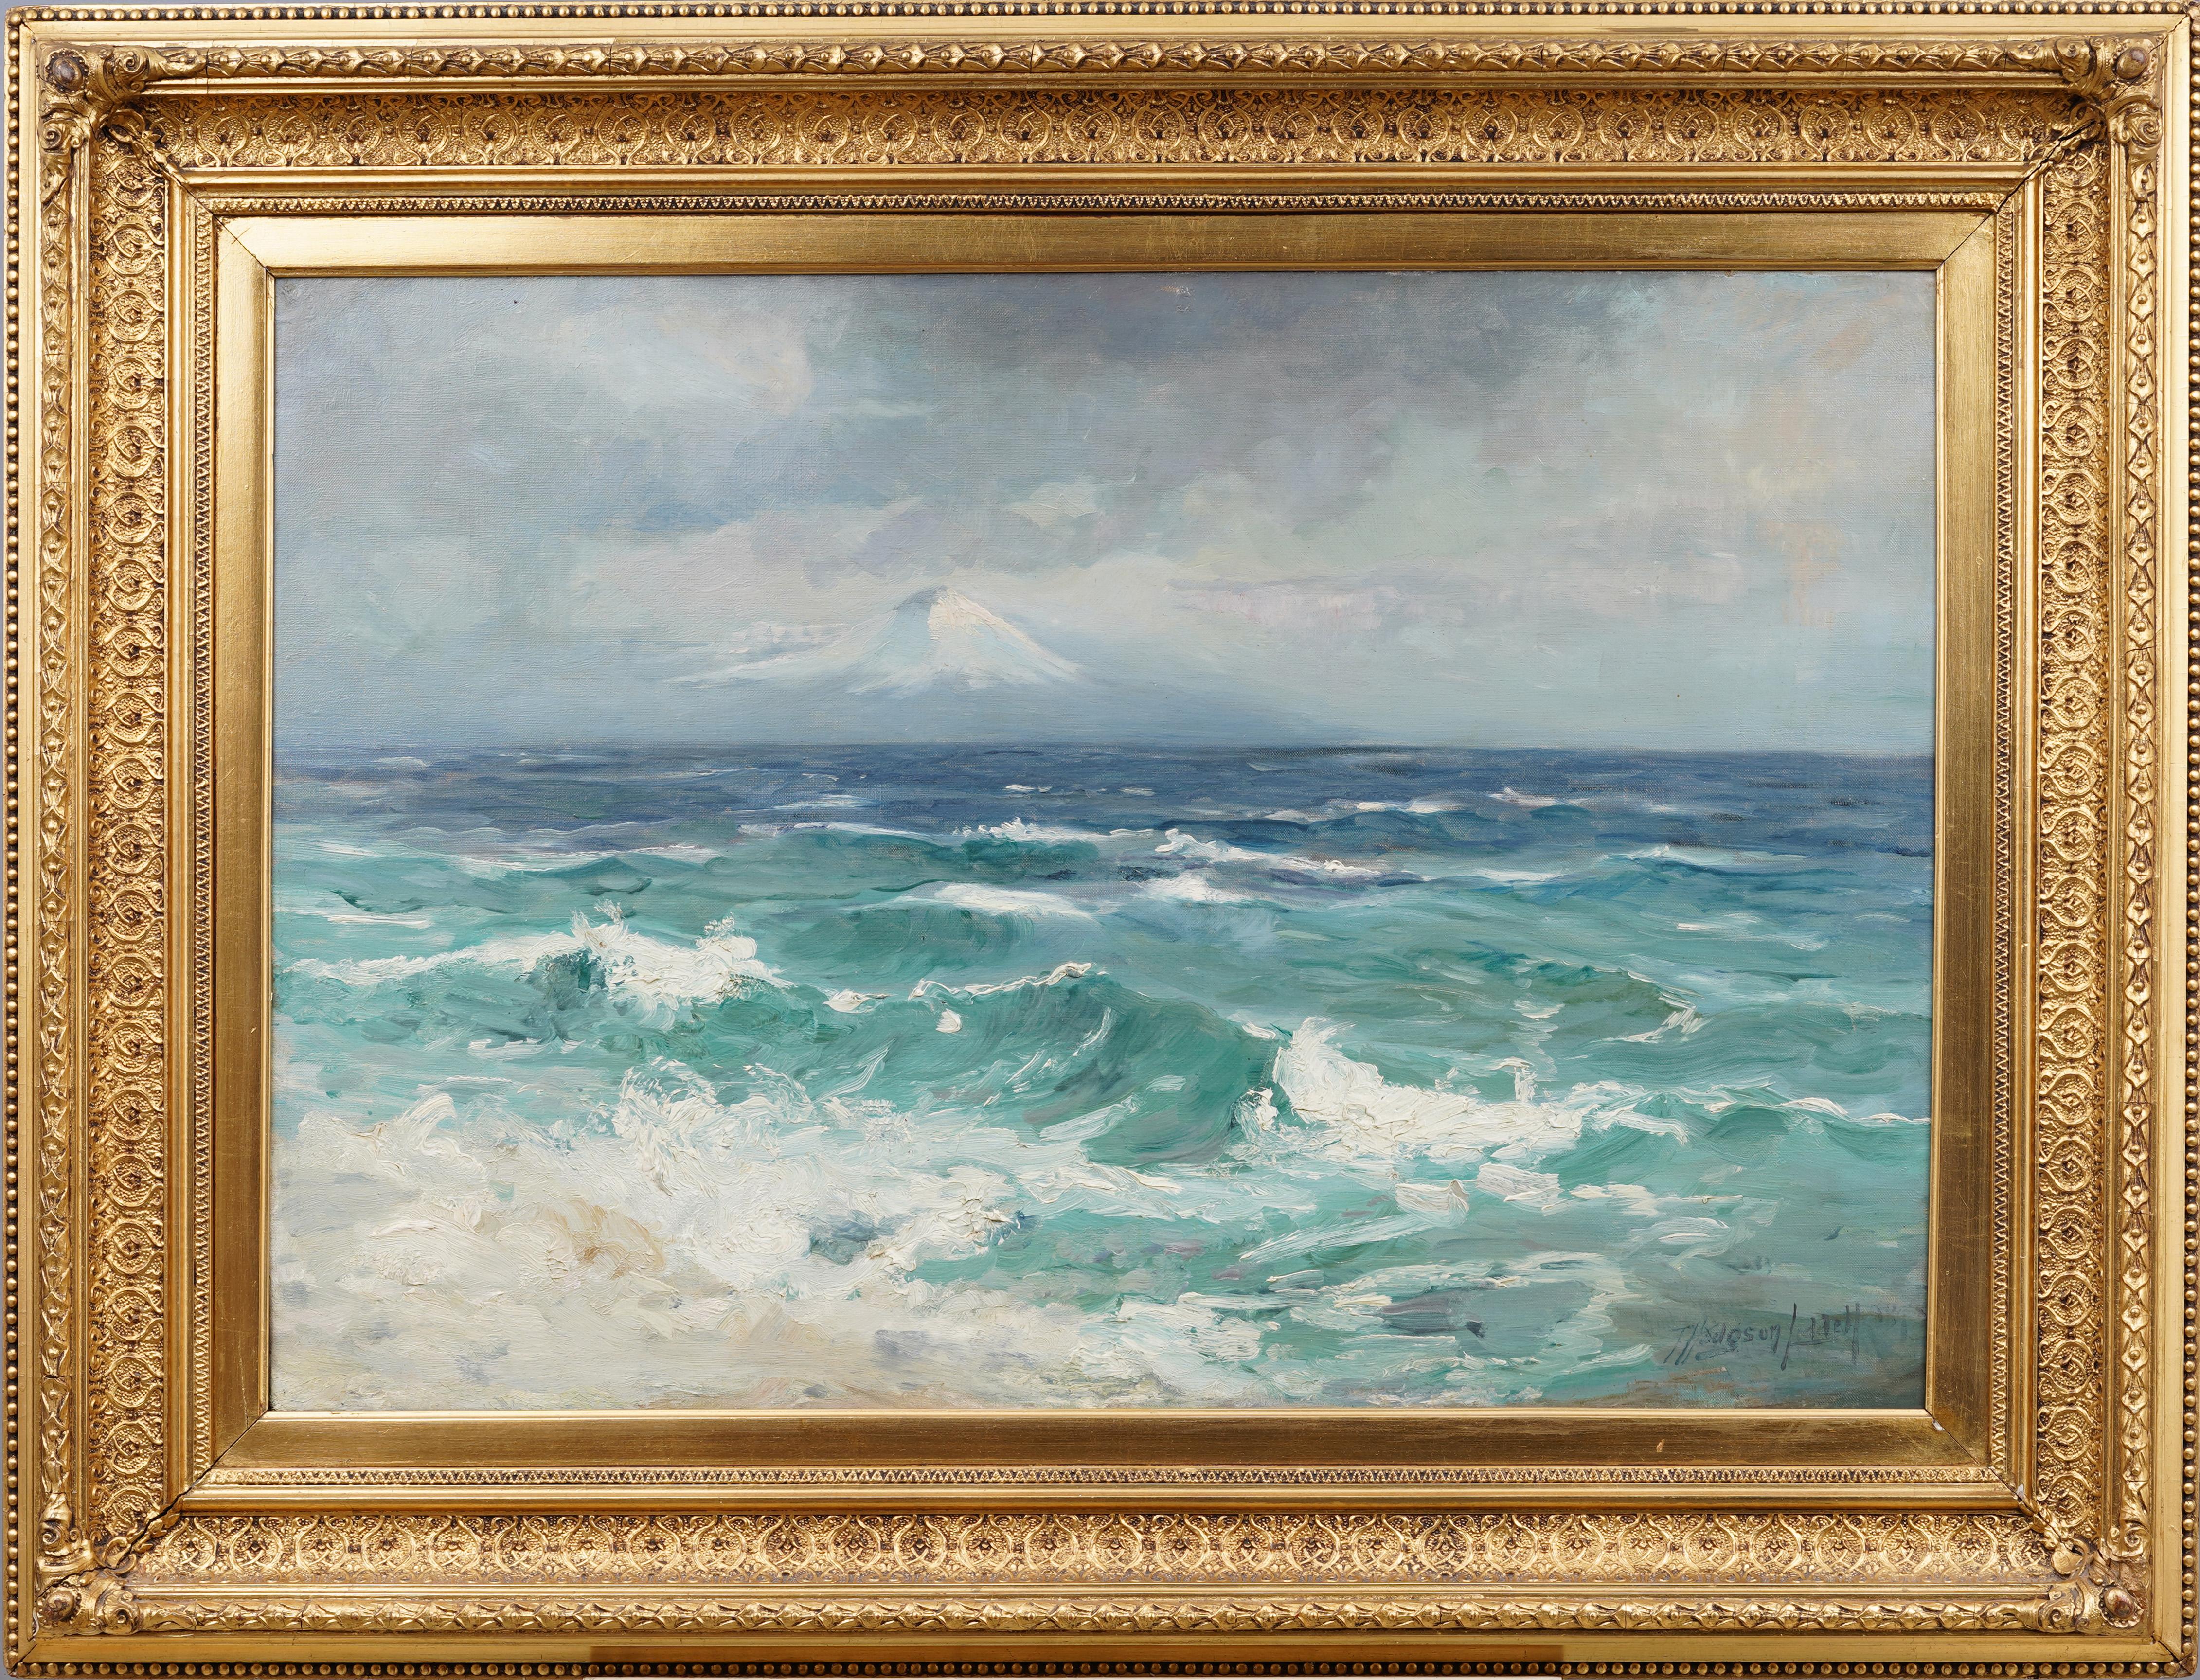 Incredible 19th century painting by Thomas Hodgson Liddell (1860 - 1925).  Oil on canvas of Mt Fuji from the sea.  Handsomely framed and ready to hang.  Signed lower right.